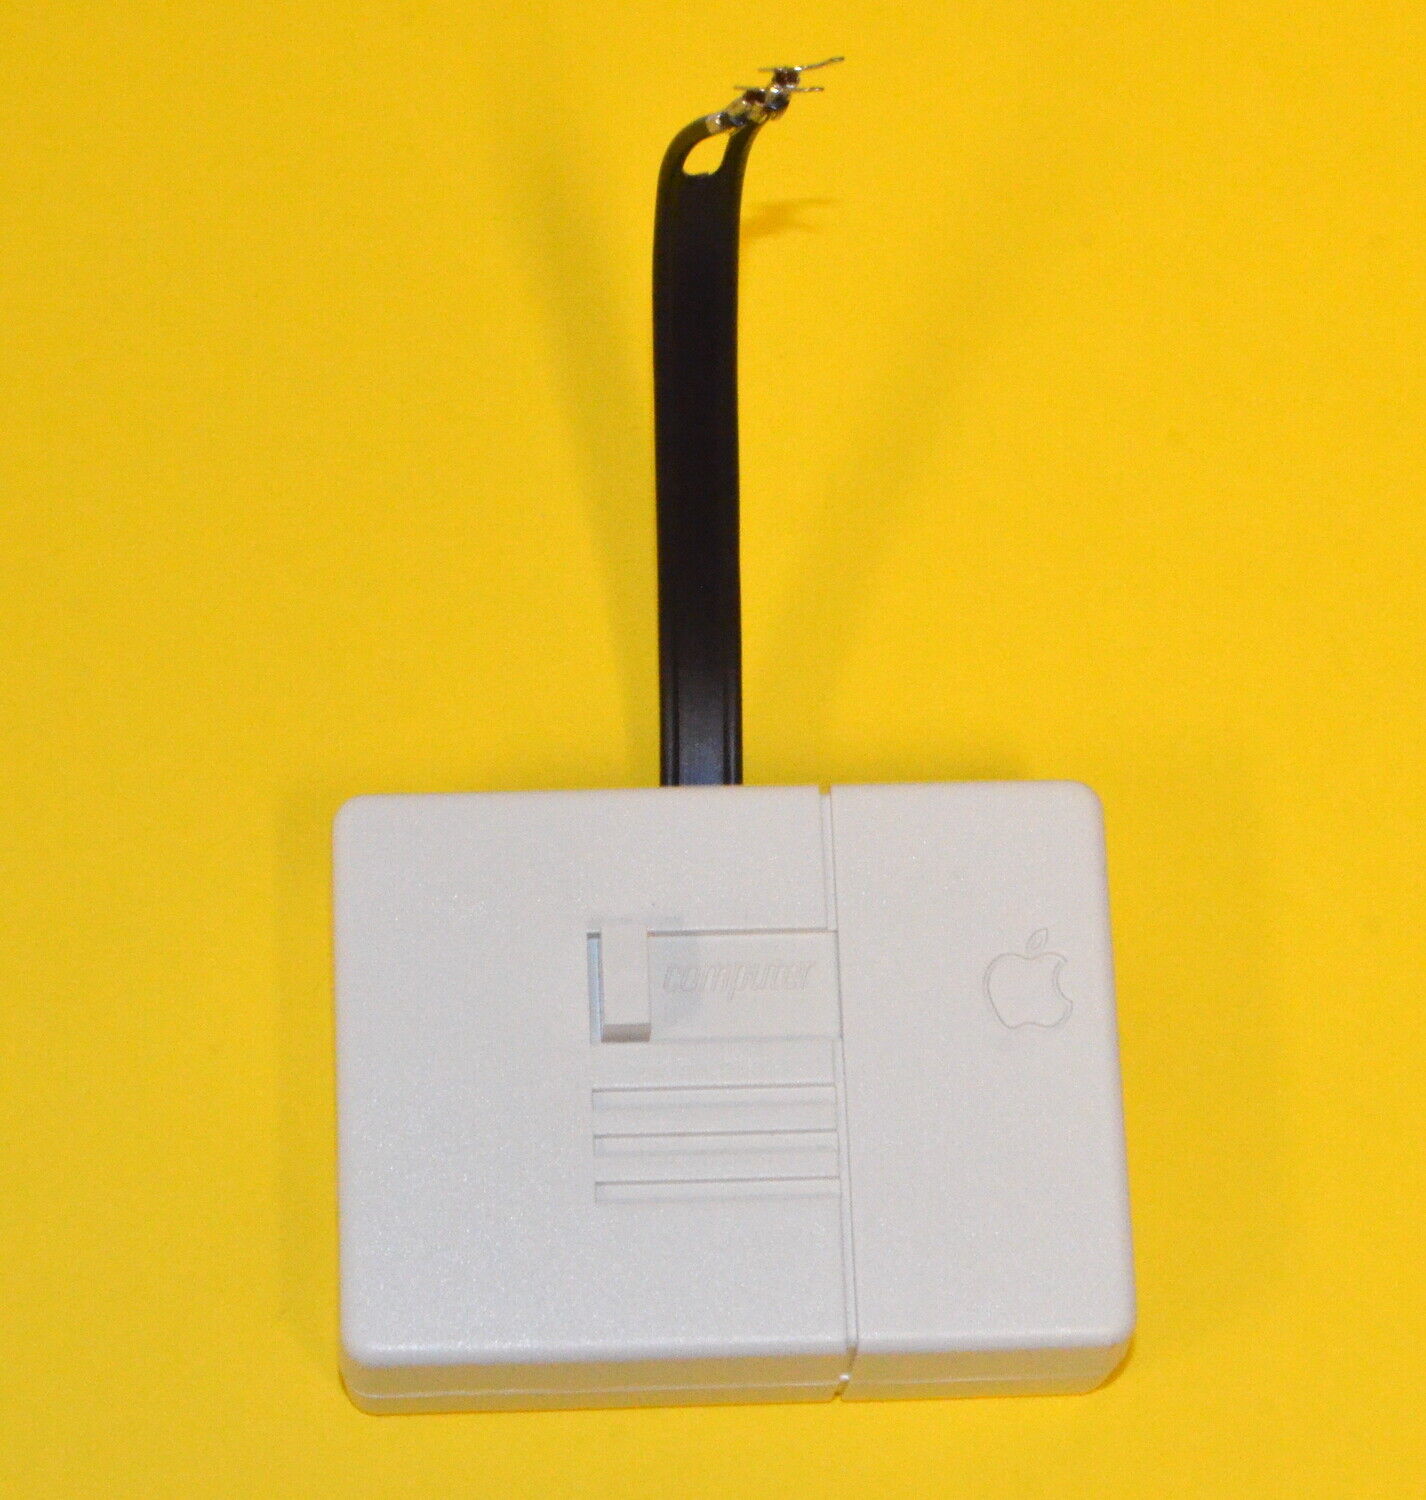 *Vintage Apple* Apple TV Switch Box for Apple IIc *Used* A2M4041, 825-0814-A